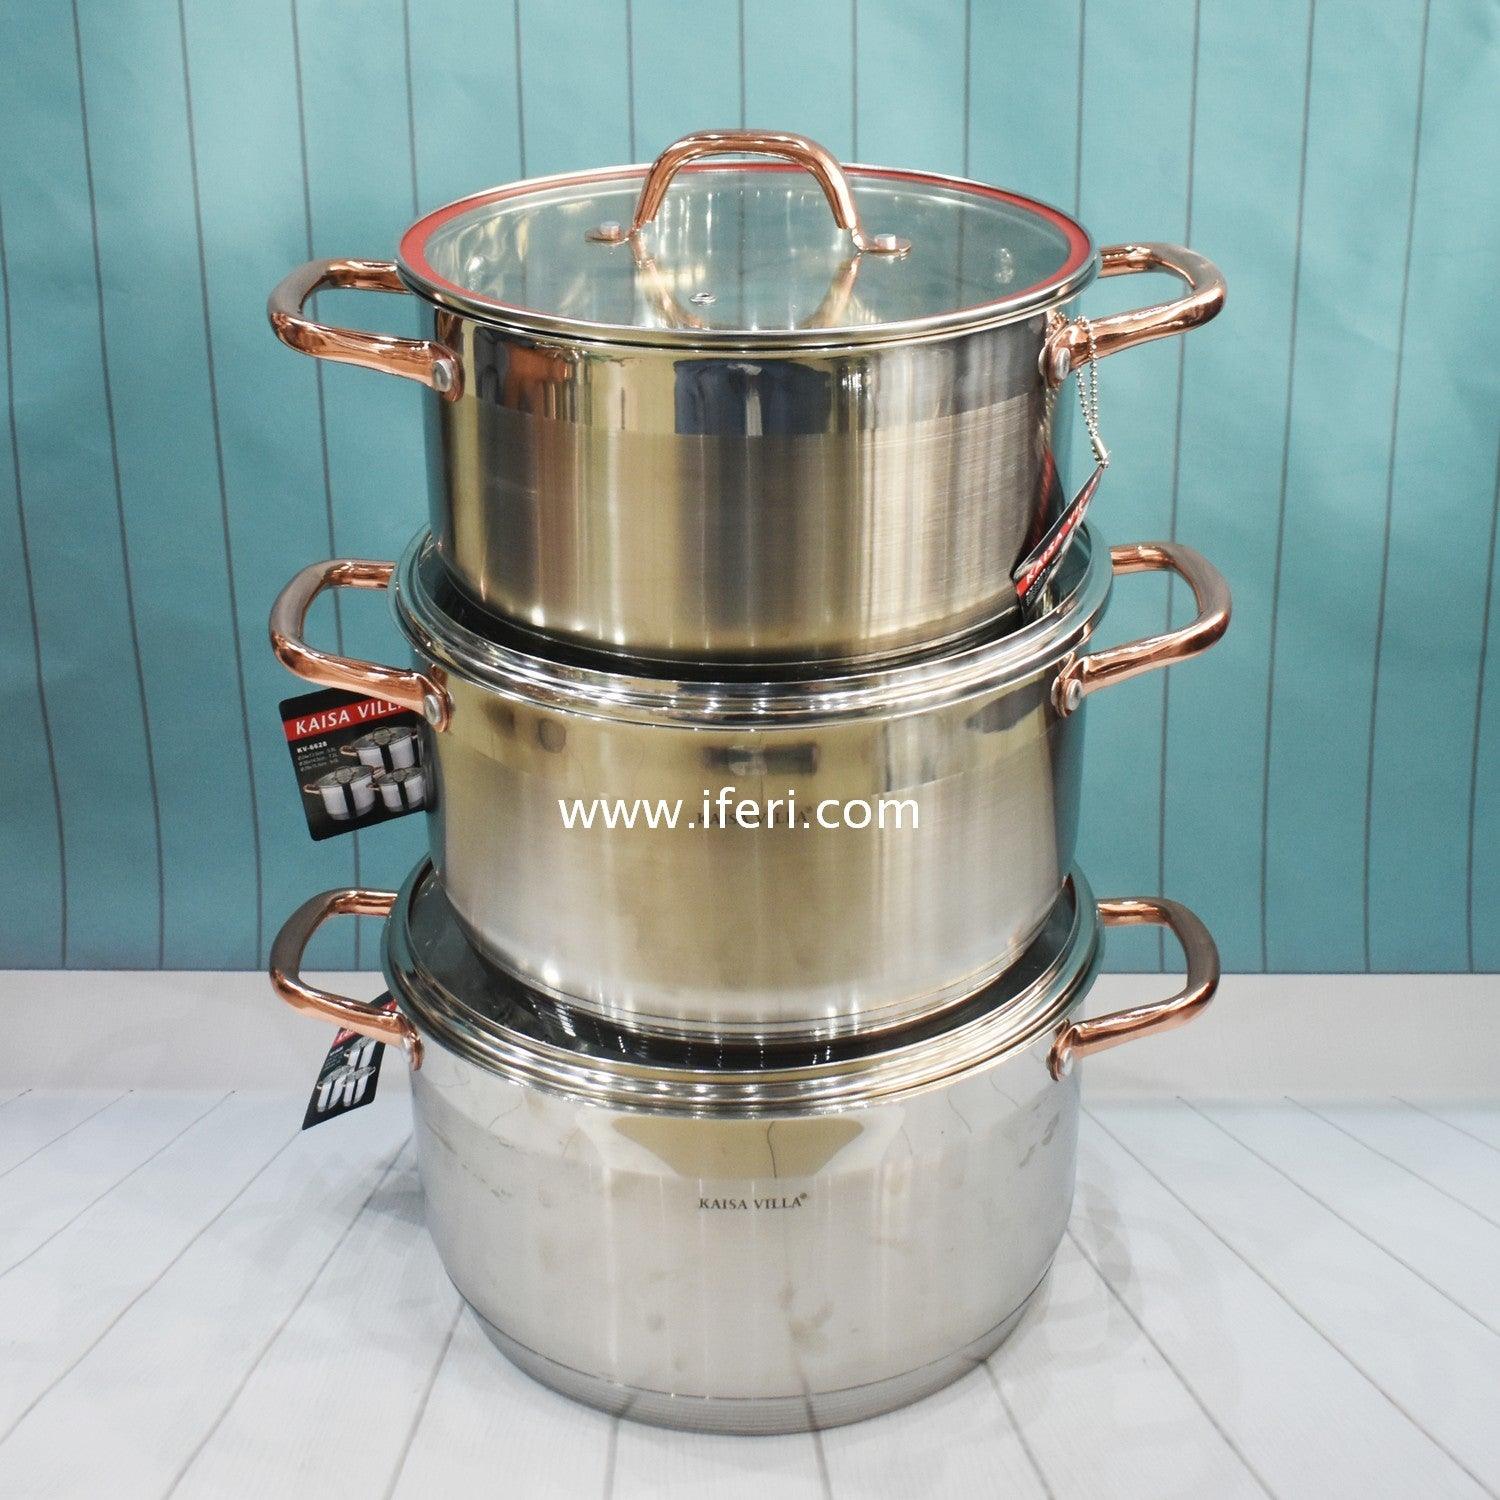 6 Pcs Stainless Steel Cookware Set With Lid KV-6628 Price in Bangladesh - iferi.com